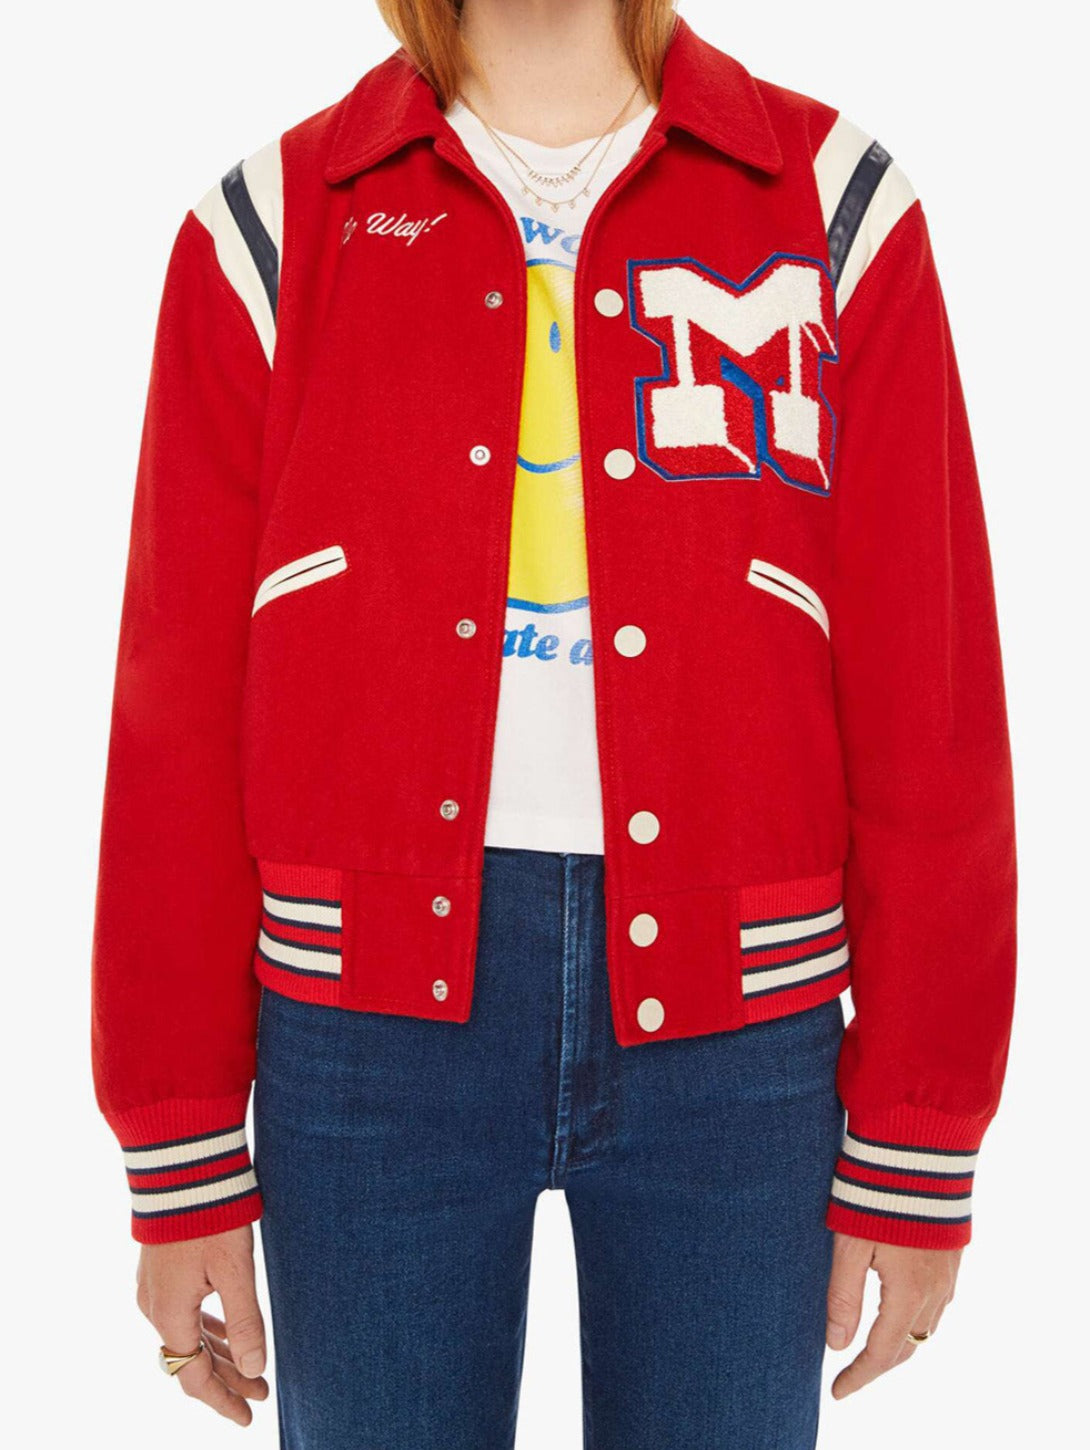 MOTHER | The Team Spirit Jacket - Sidelines | Over The Rainbow Canada ...